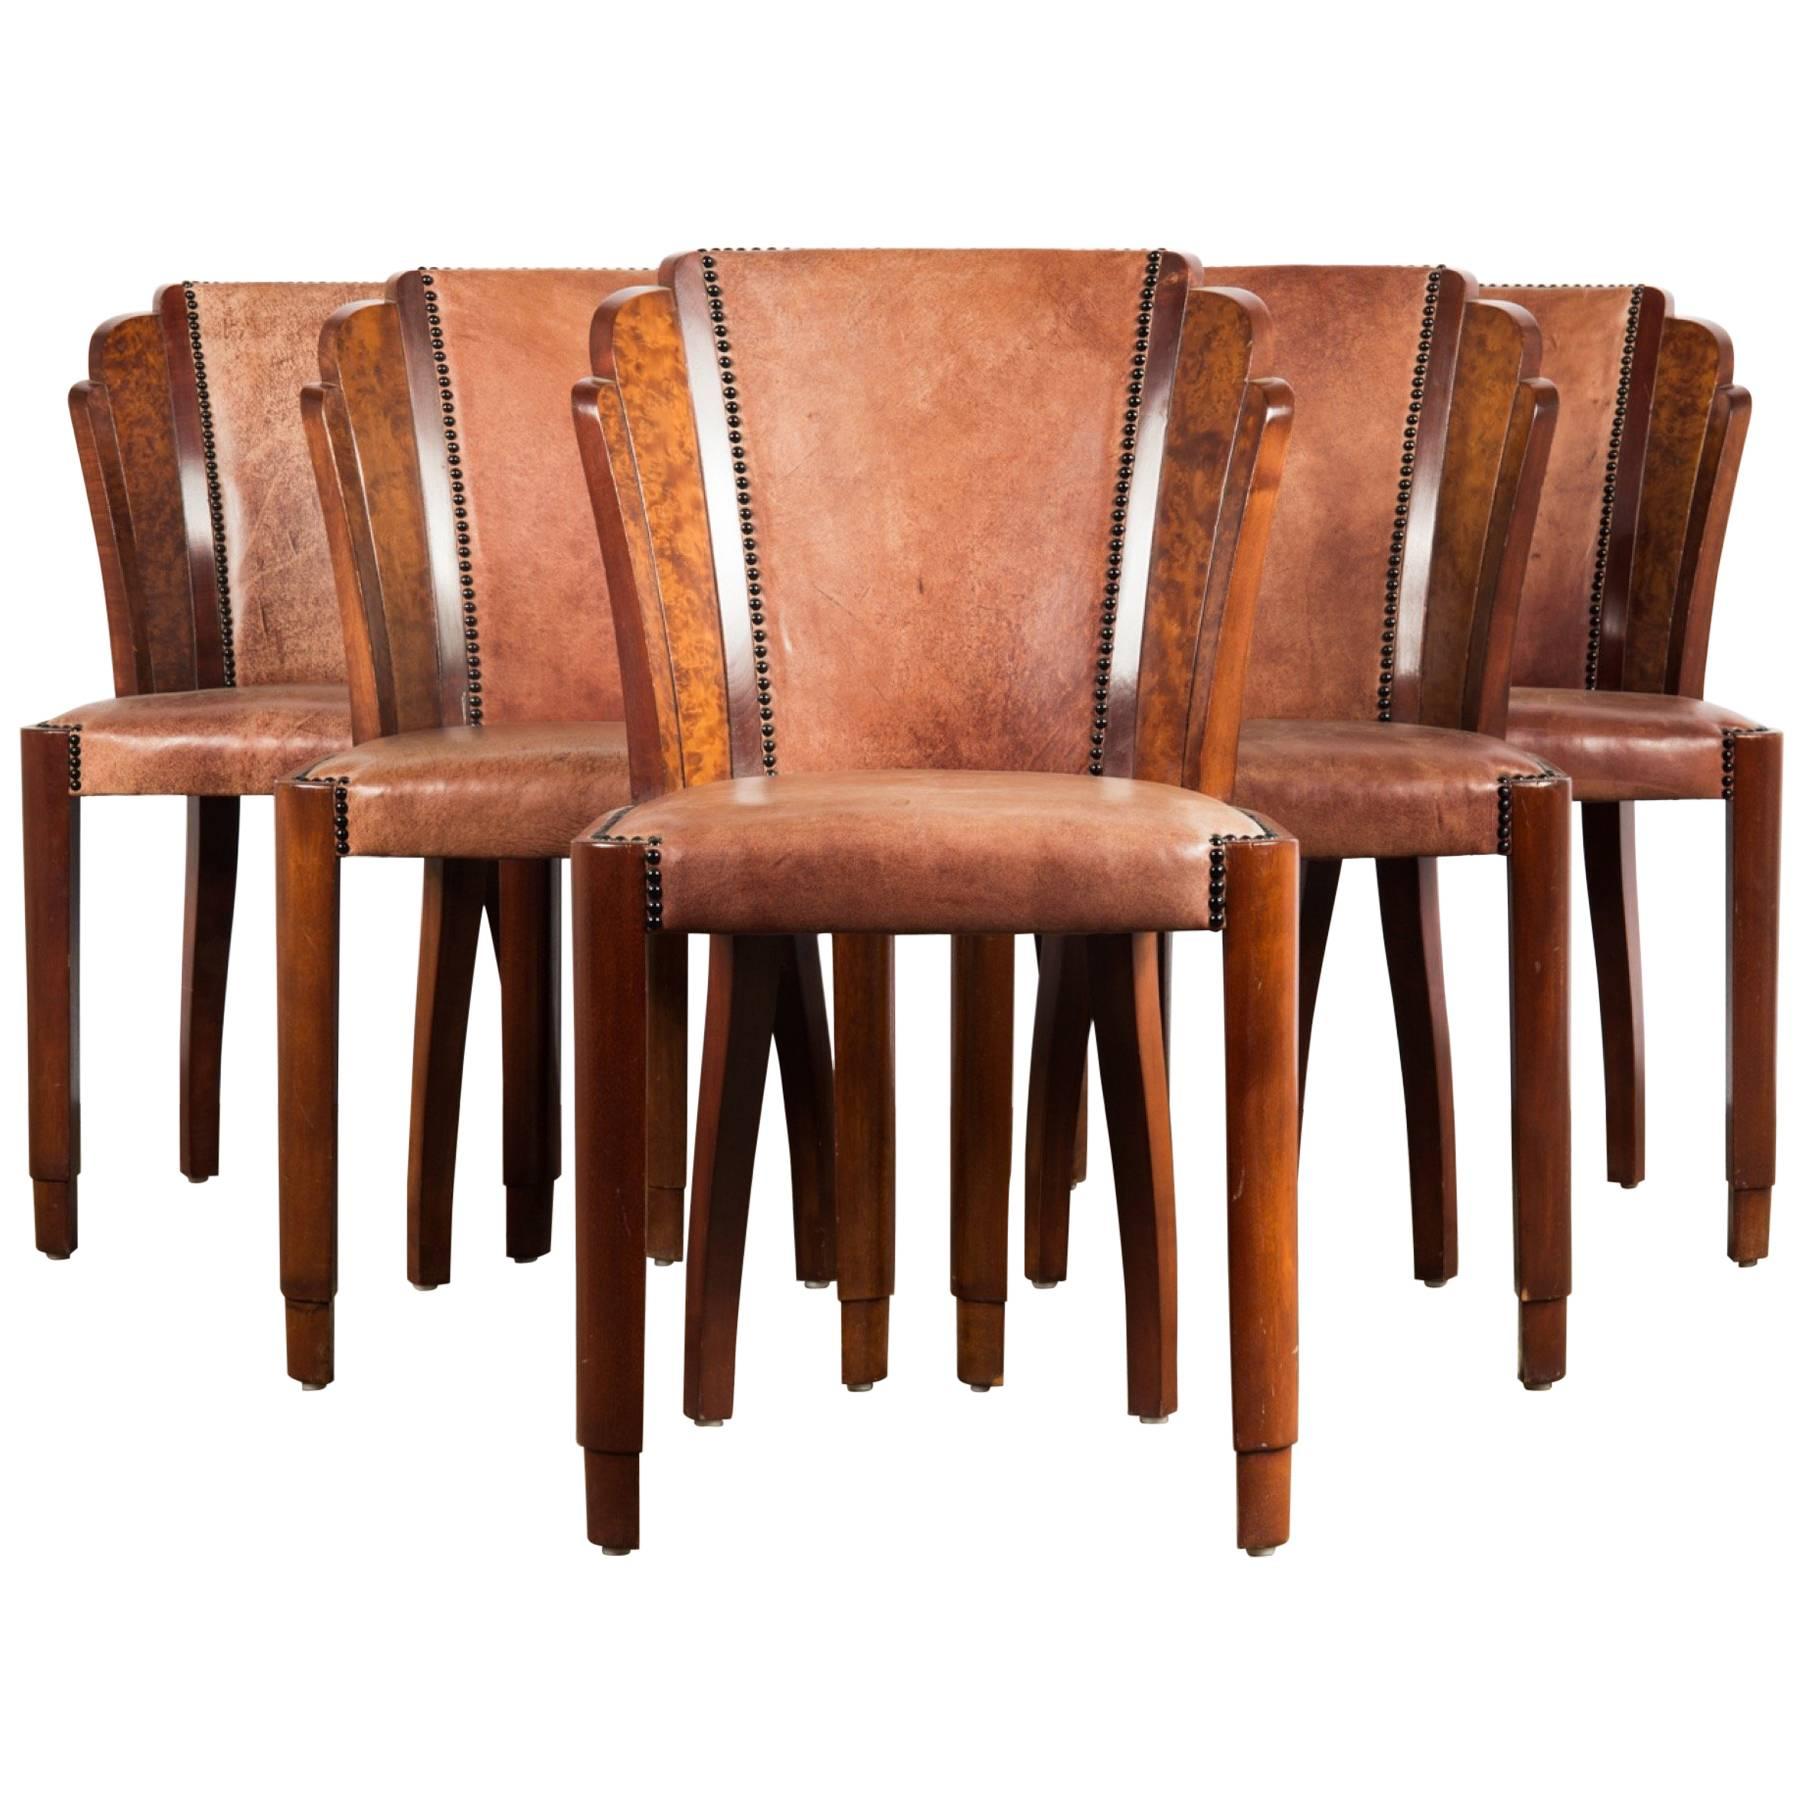 Set of Six Art Deco Dining Chairs in Walnut Burl and Cognac Leather